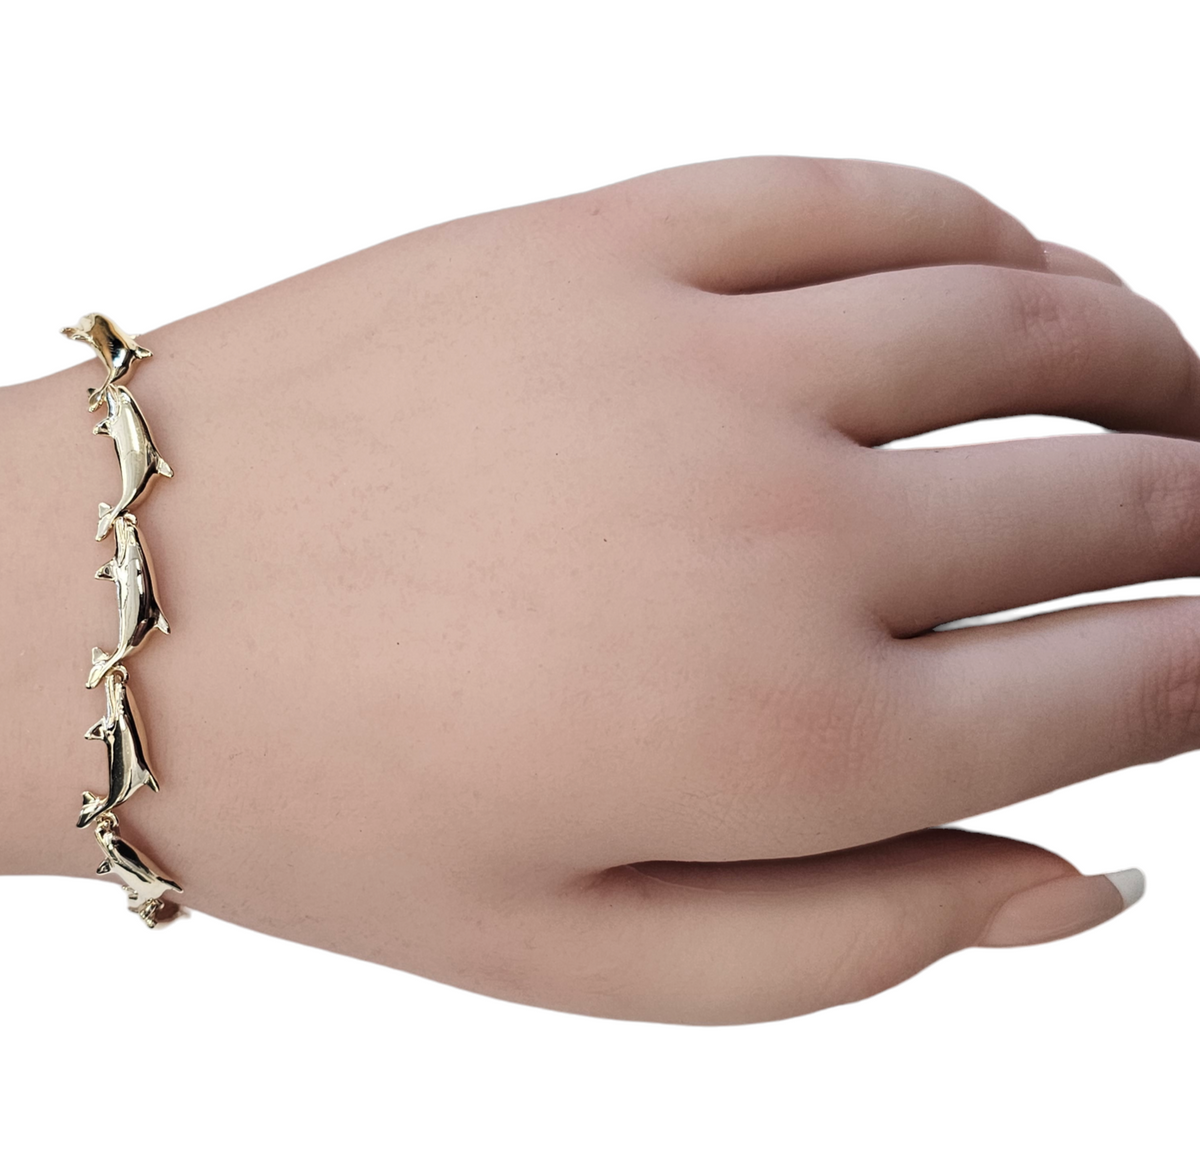 Dolphin bracelet made in solid 14-Karat yellow gold